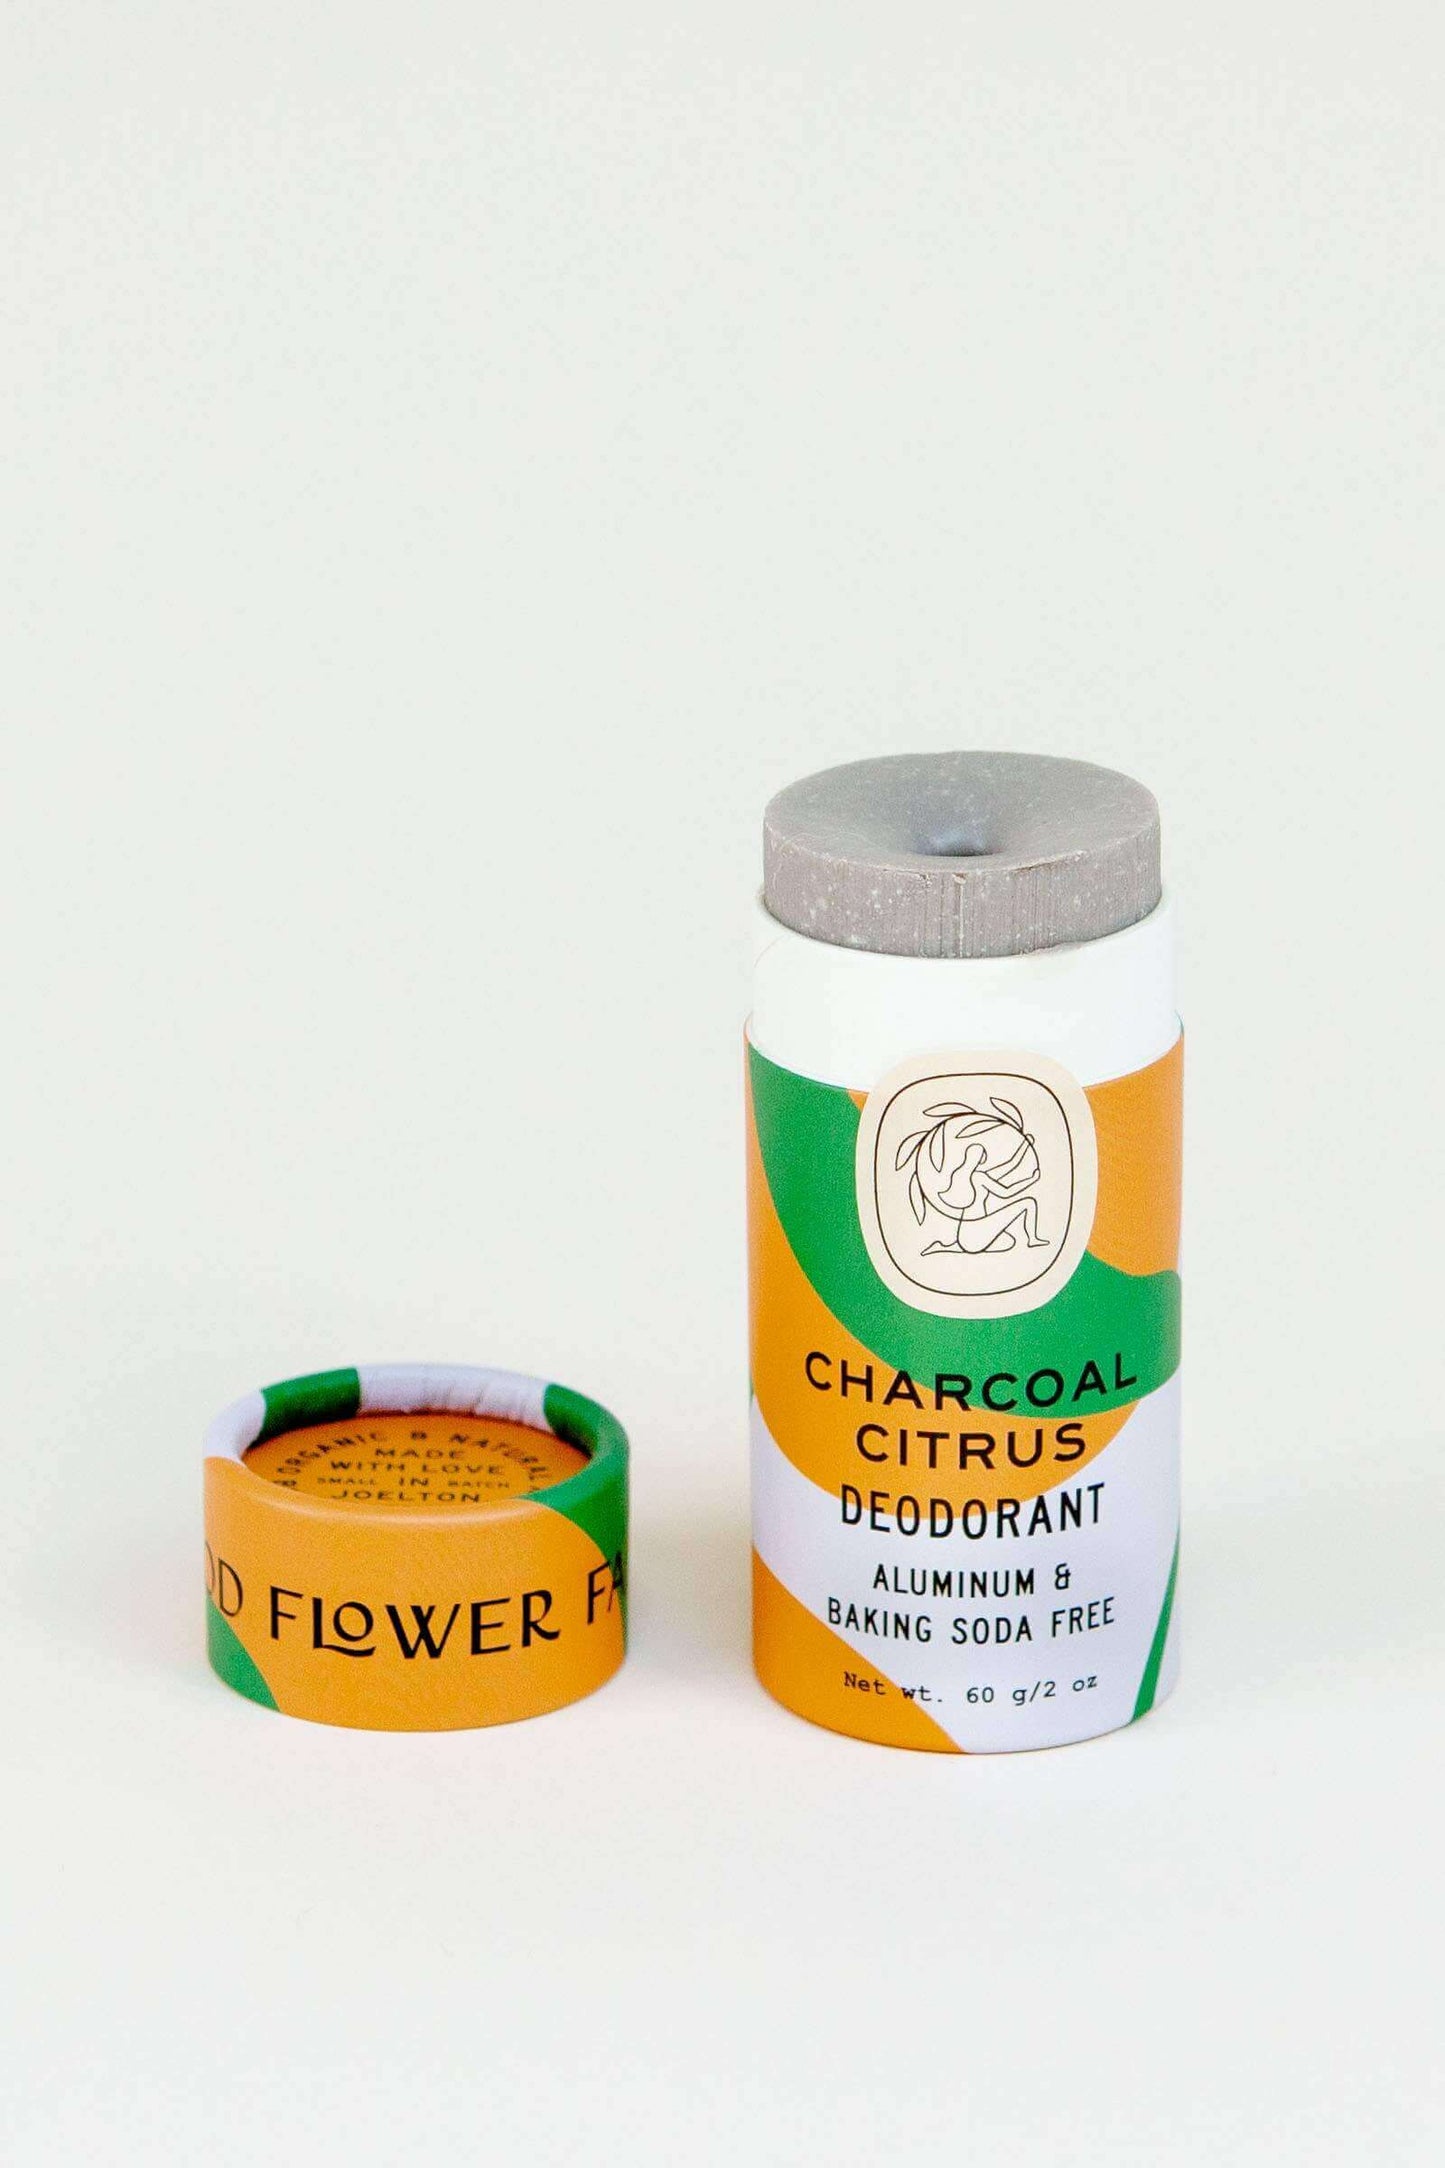 Charcoal citrus deodorant stick in a white, green and orange biodegradable tube with the lid off and sitting next to it.